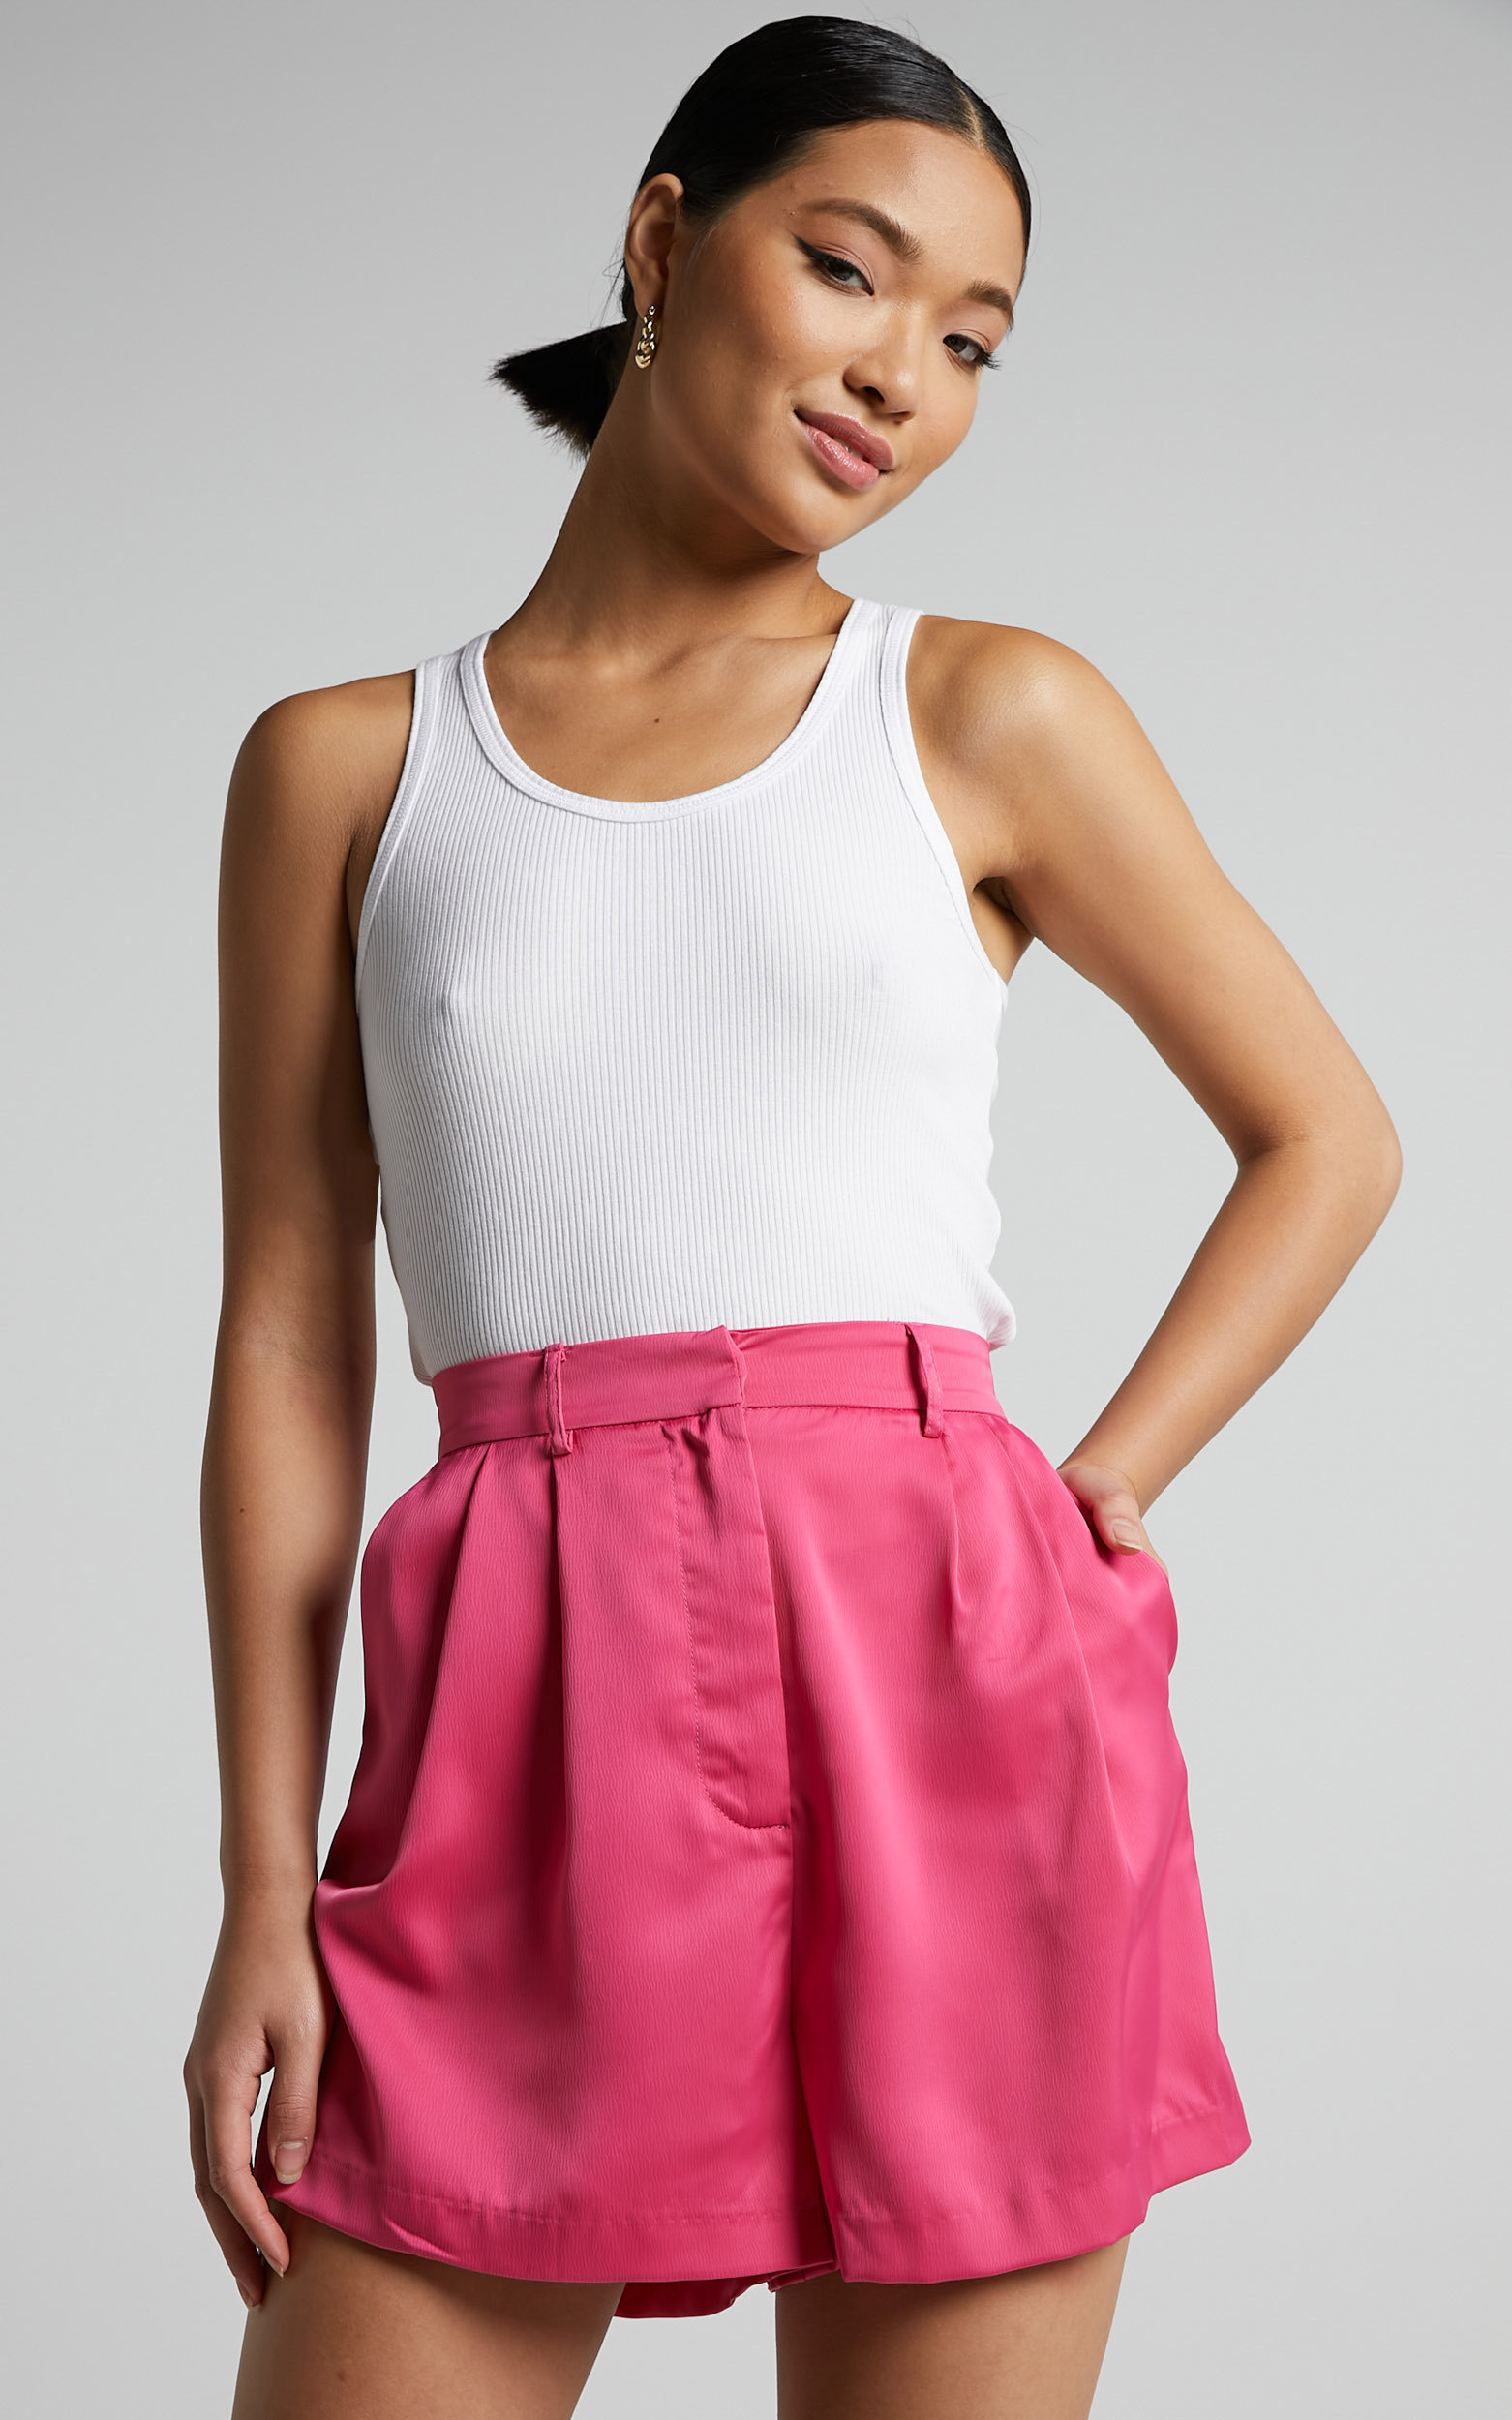 Jannie Shorts - High Waist Tailored Shorts in Pink - 04, PNK1, hi-res image number null